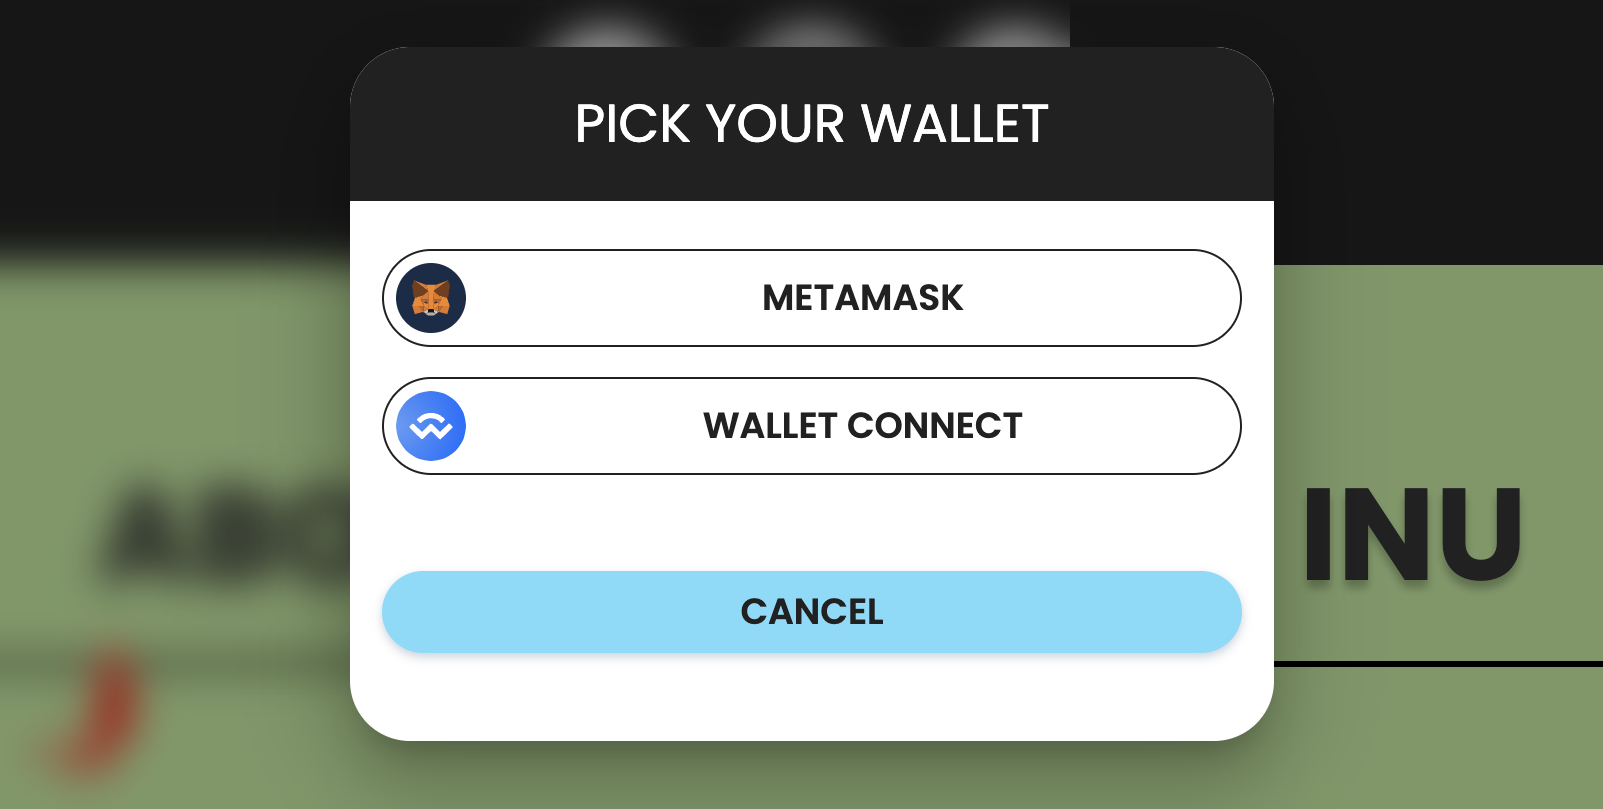 Connect your Wallet